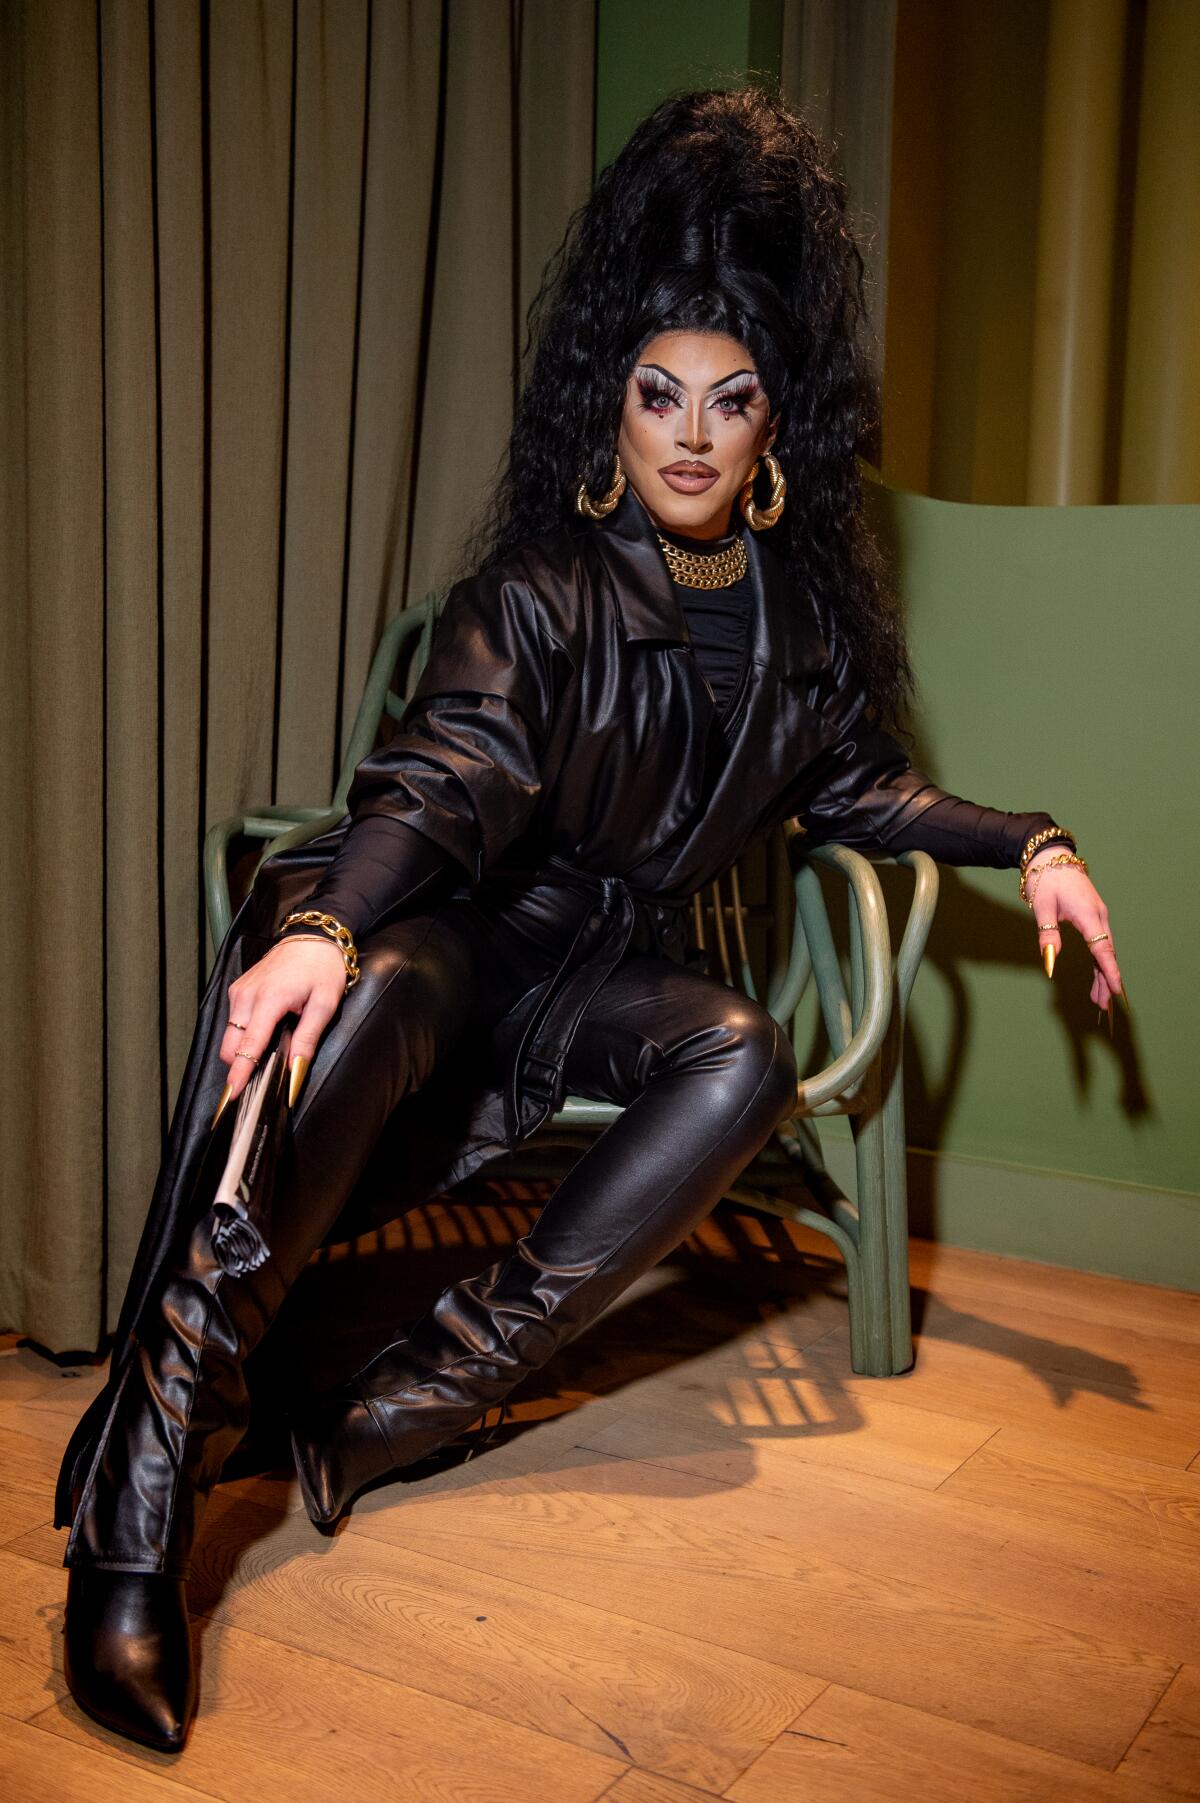 A person with long black hair wearing a black leather coat and black leather boots sitting in a chair